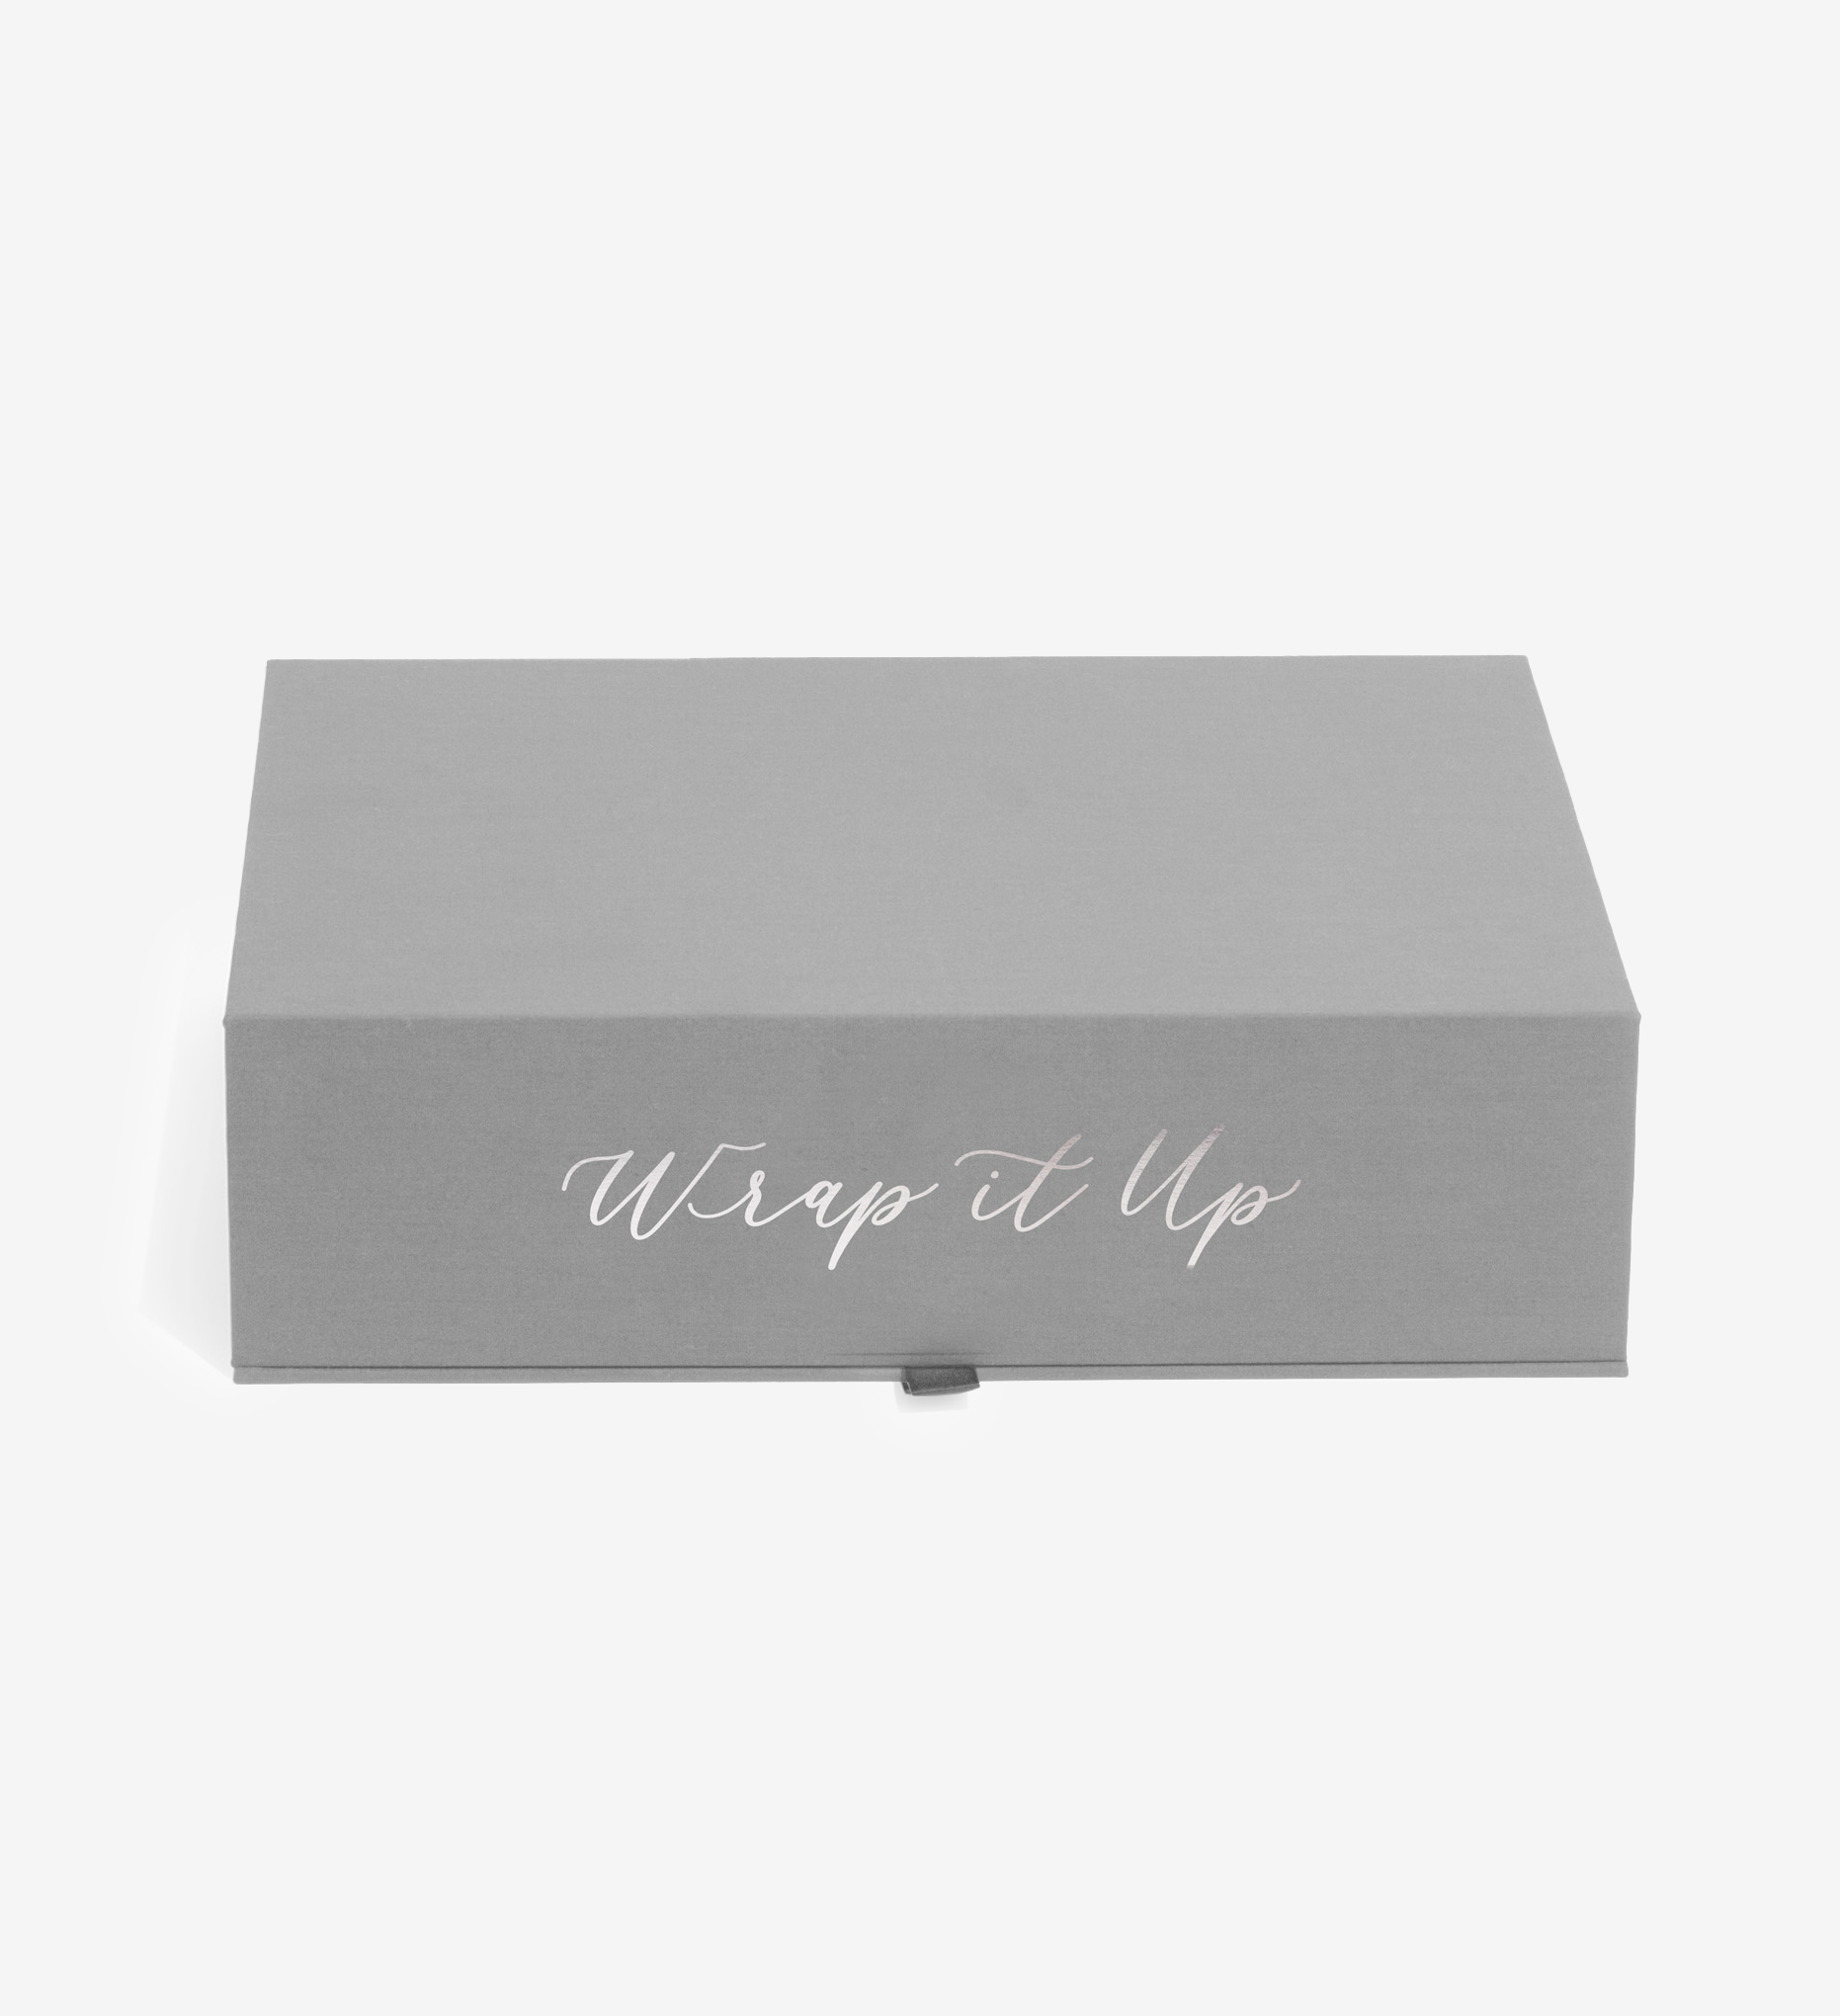 closed slate safe deposit box personalized with wrap it up